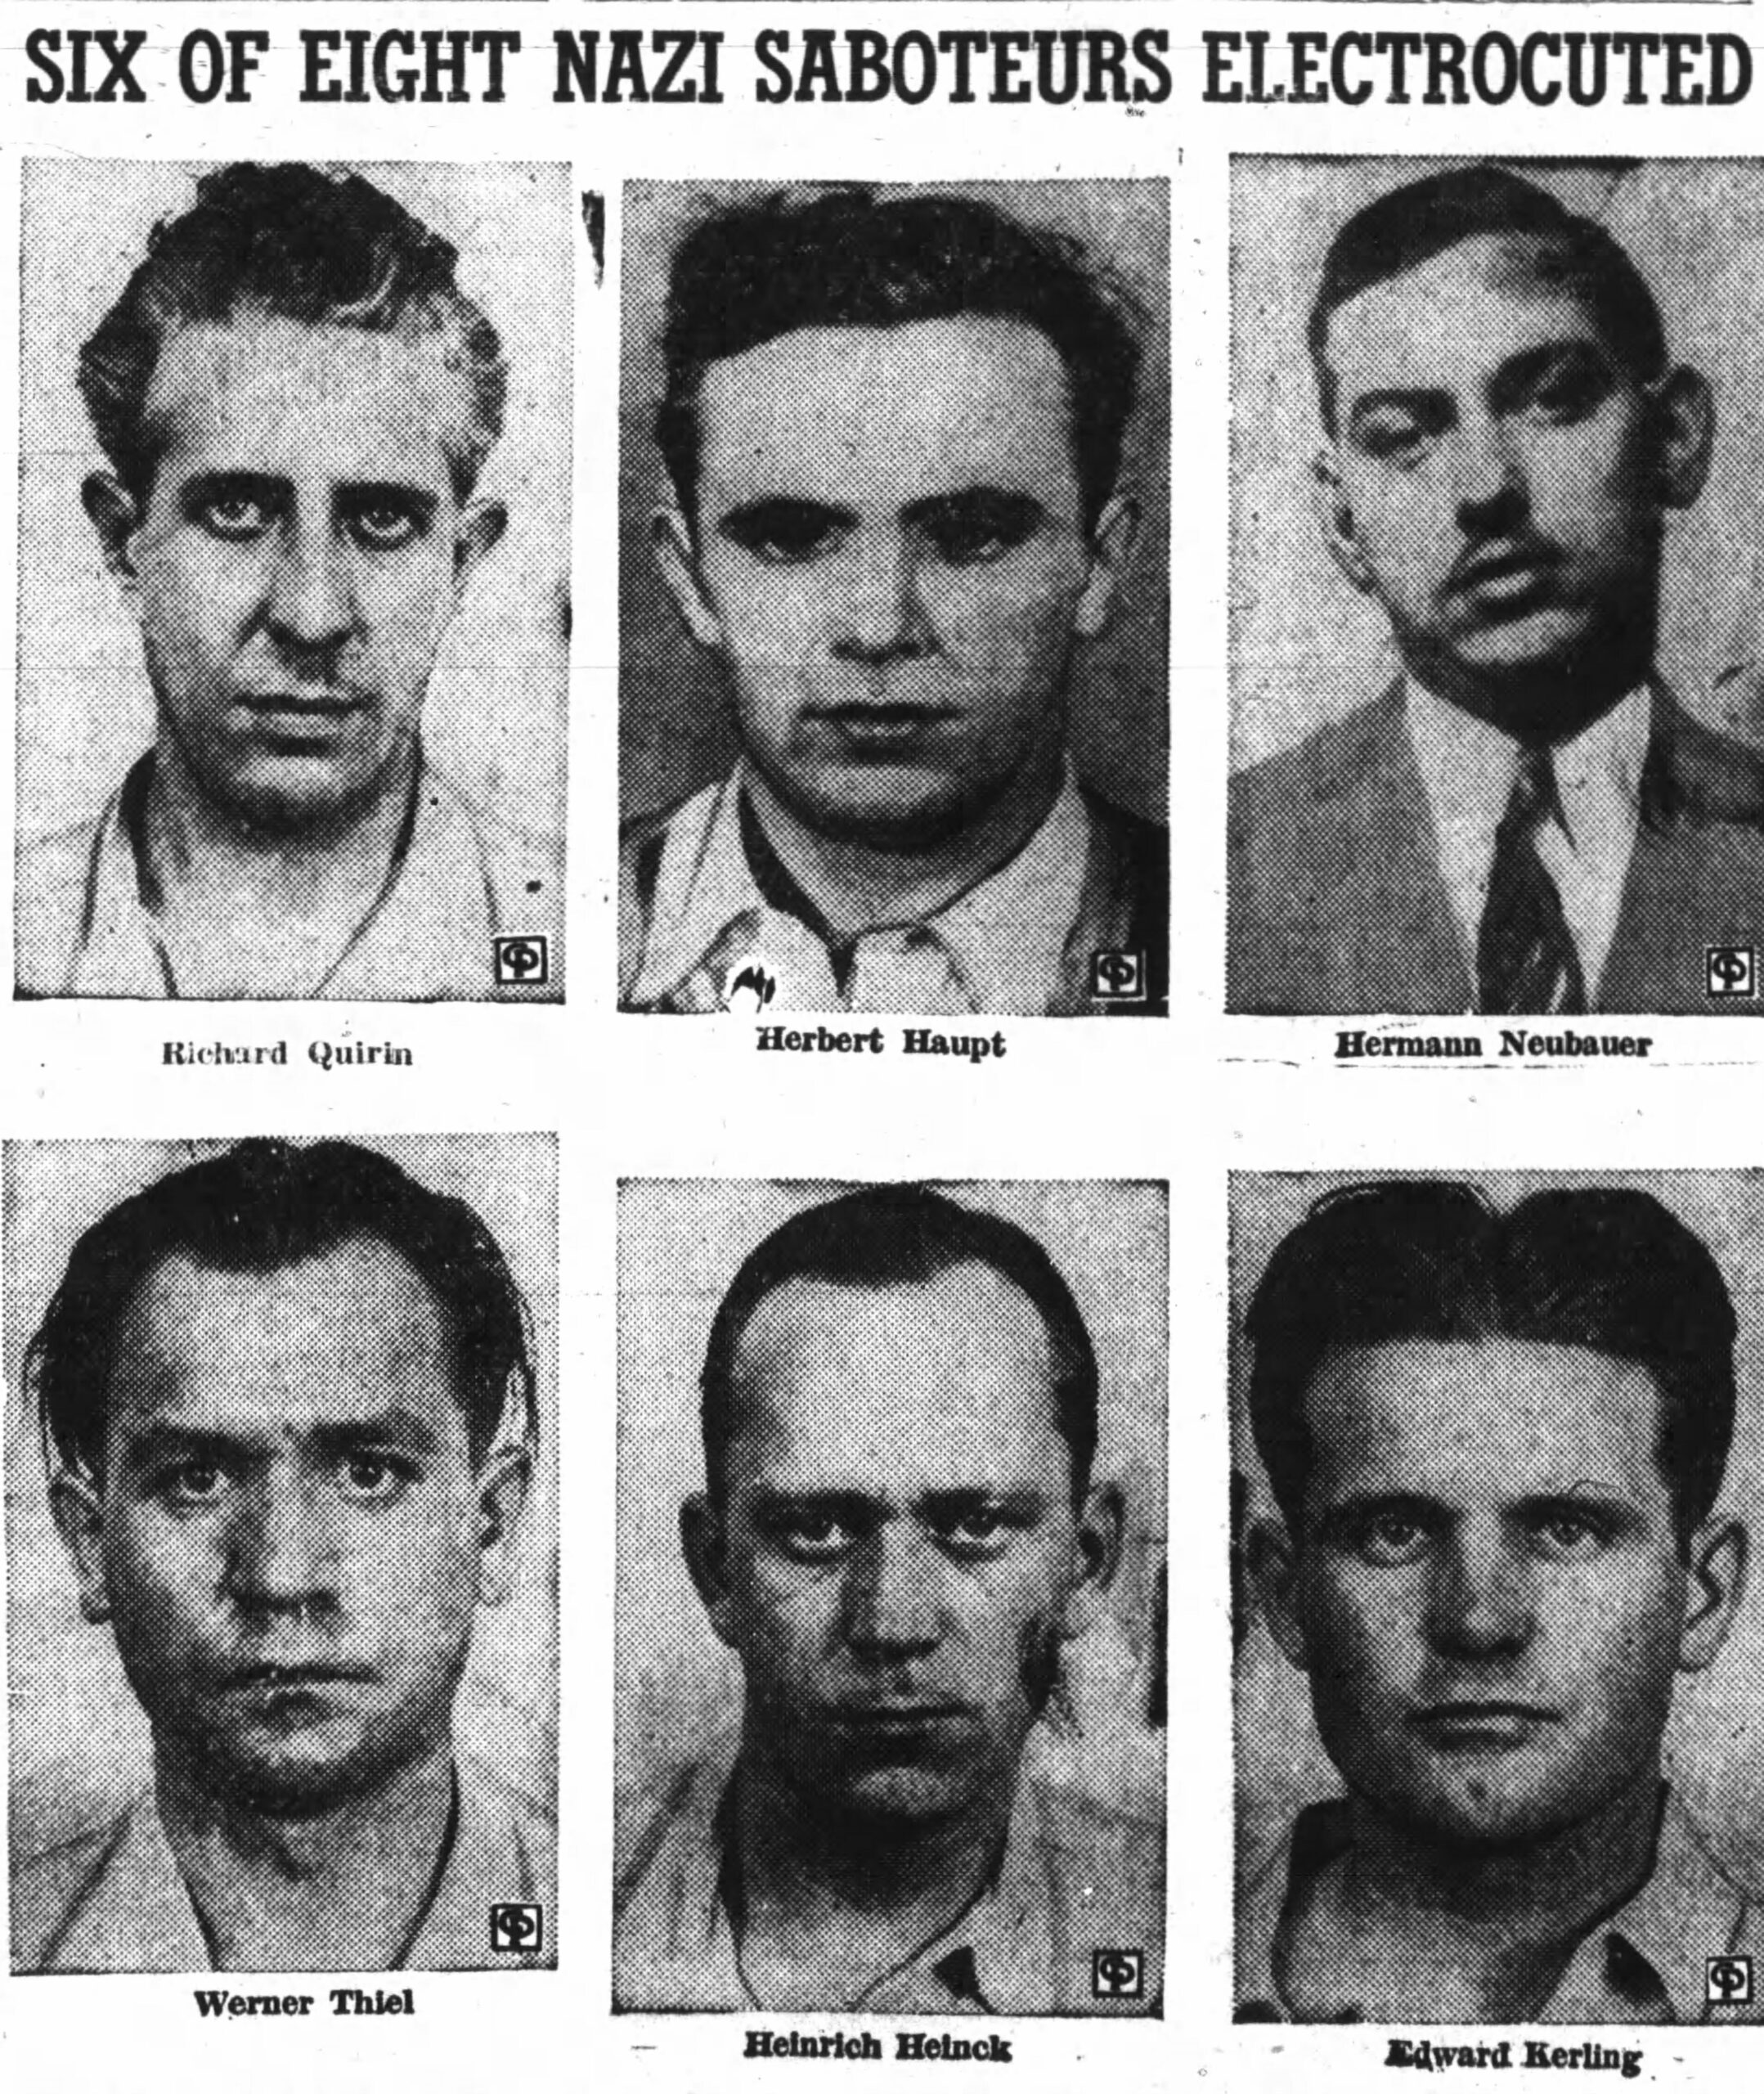 Saboteur photos in the Belvidere Daily Republican, Belvidere, Illinois, August 8, 1942.